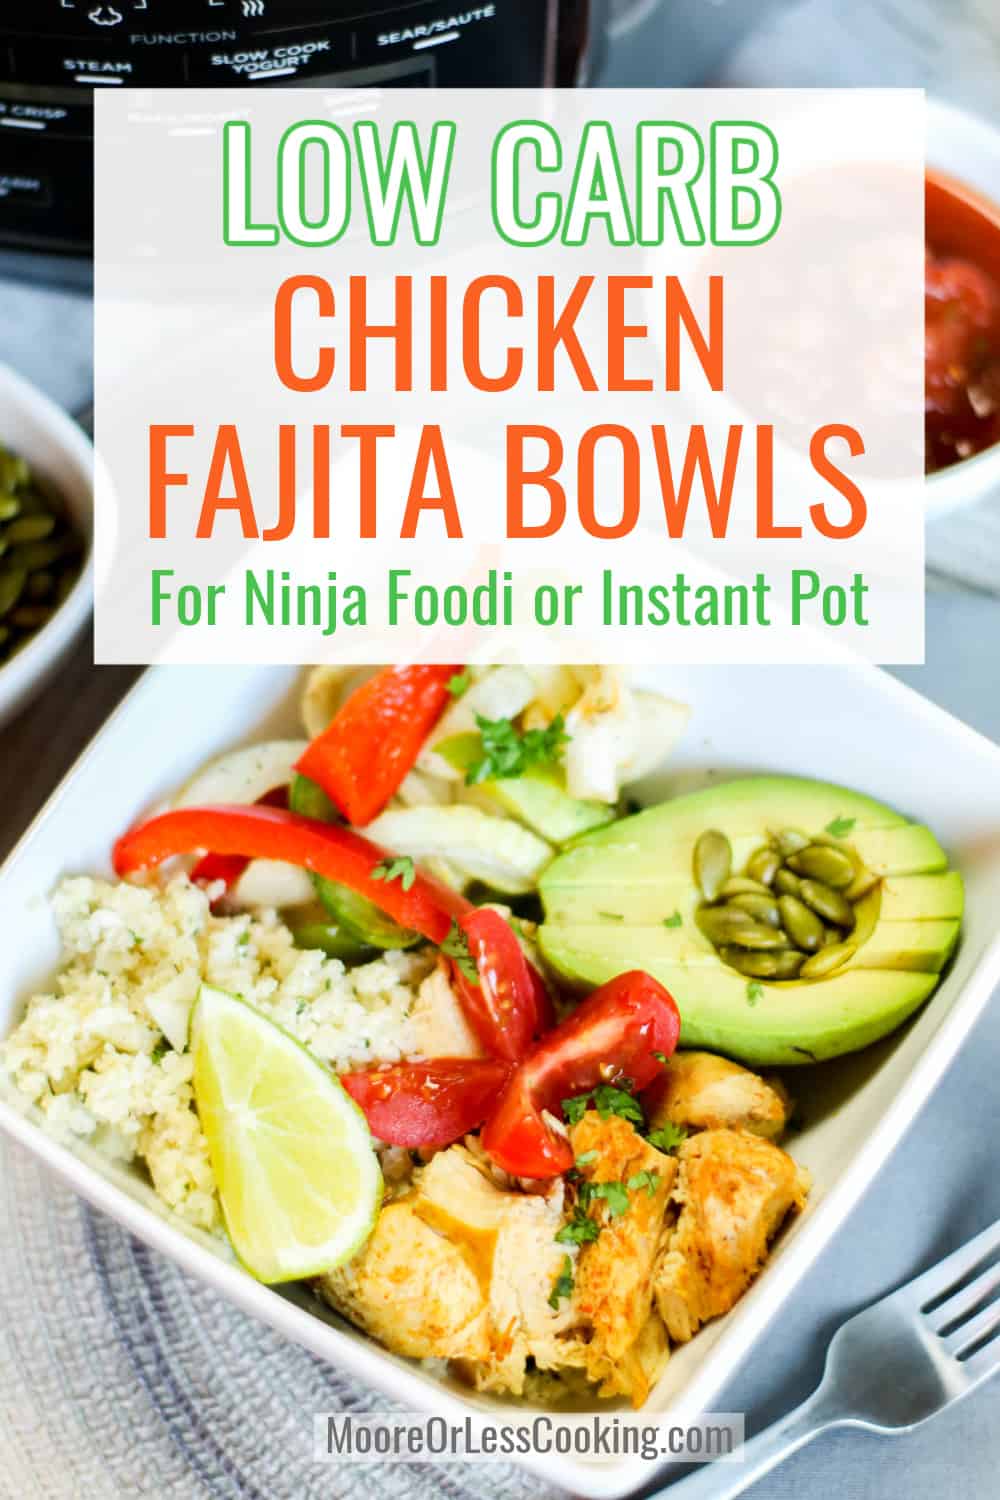 The directions will work for a Ninja Foodi or Instant Pot to create a tasty low-carb chicken fajita bowl that will take its rightful place in your chicken dinner rotation. via @Mooreorlesscook